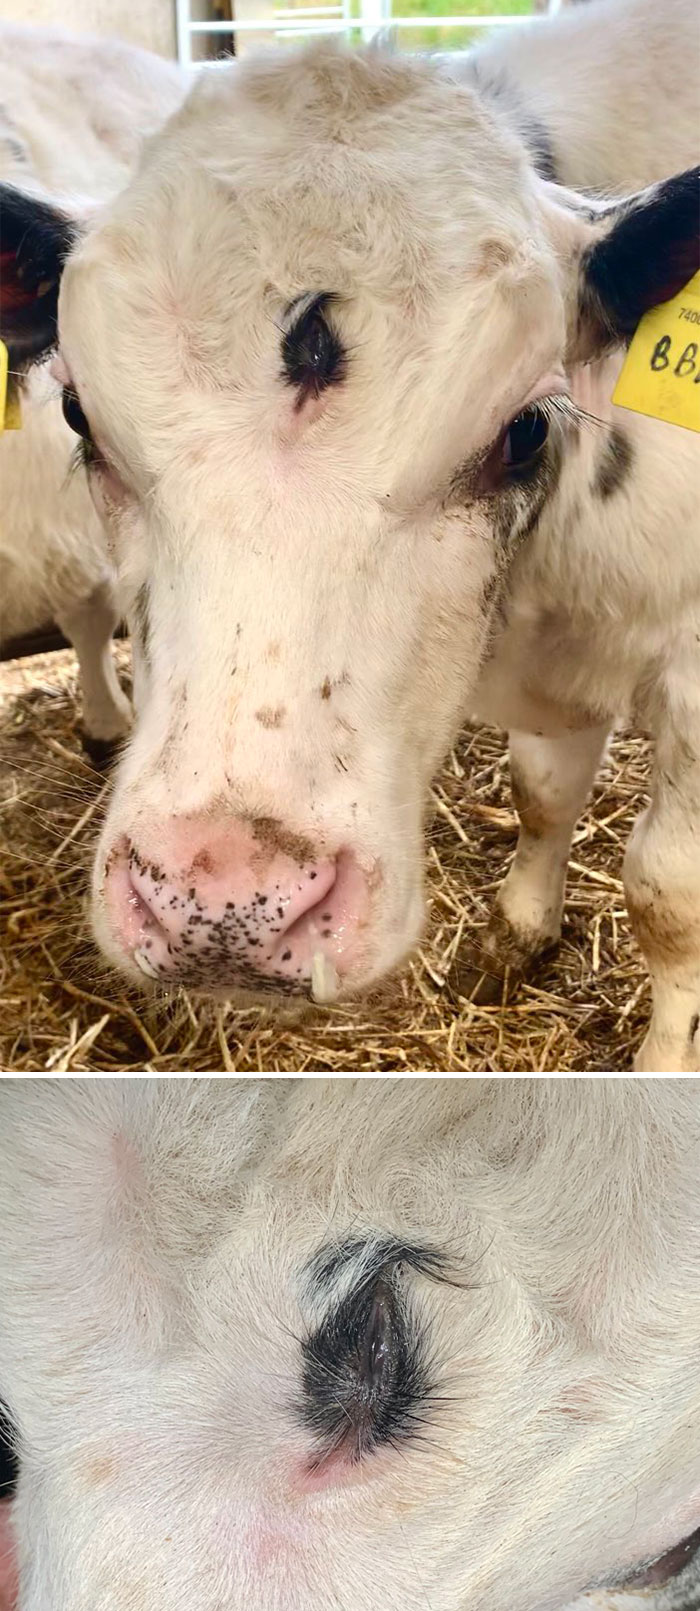 A Calf With Three Eyes Has Been Born In Wales. The Vet Who Took The Picture Said She Had Never Seen Anything Like It Before